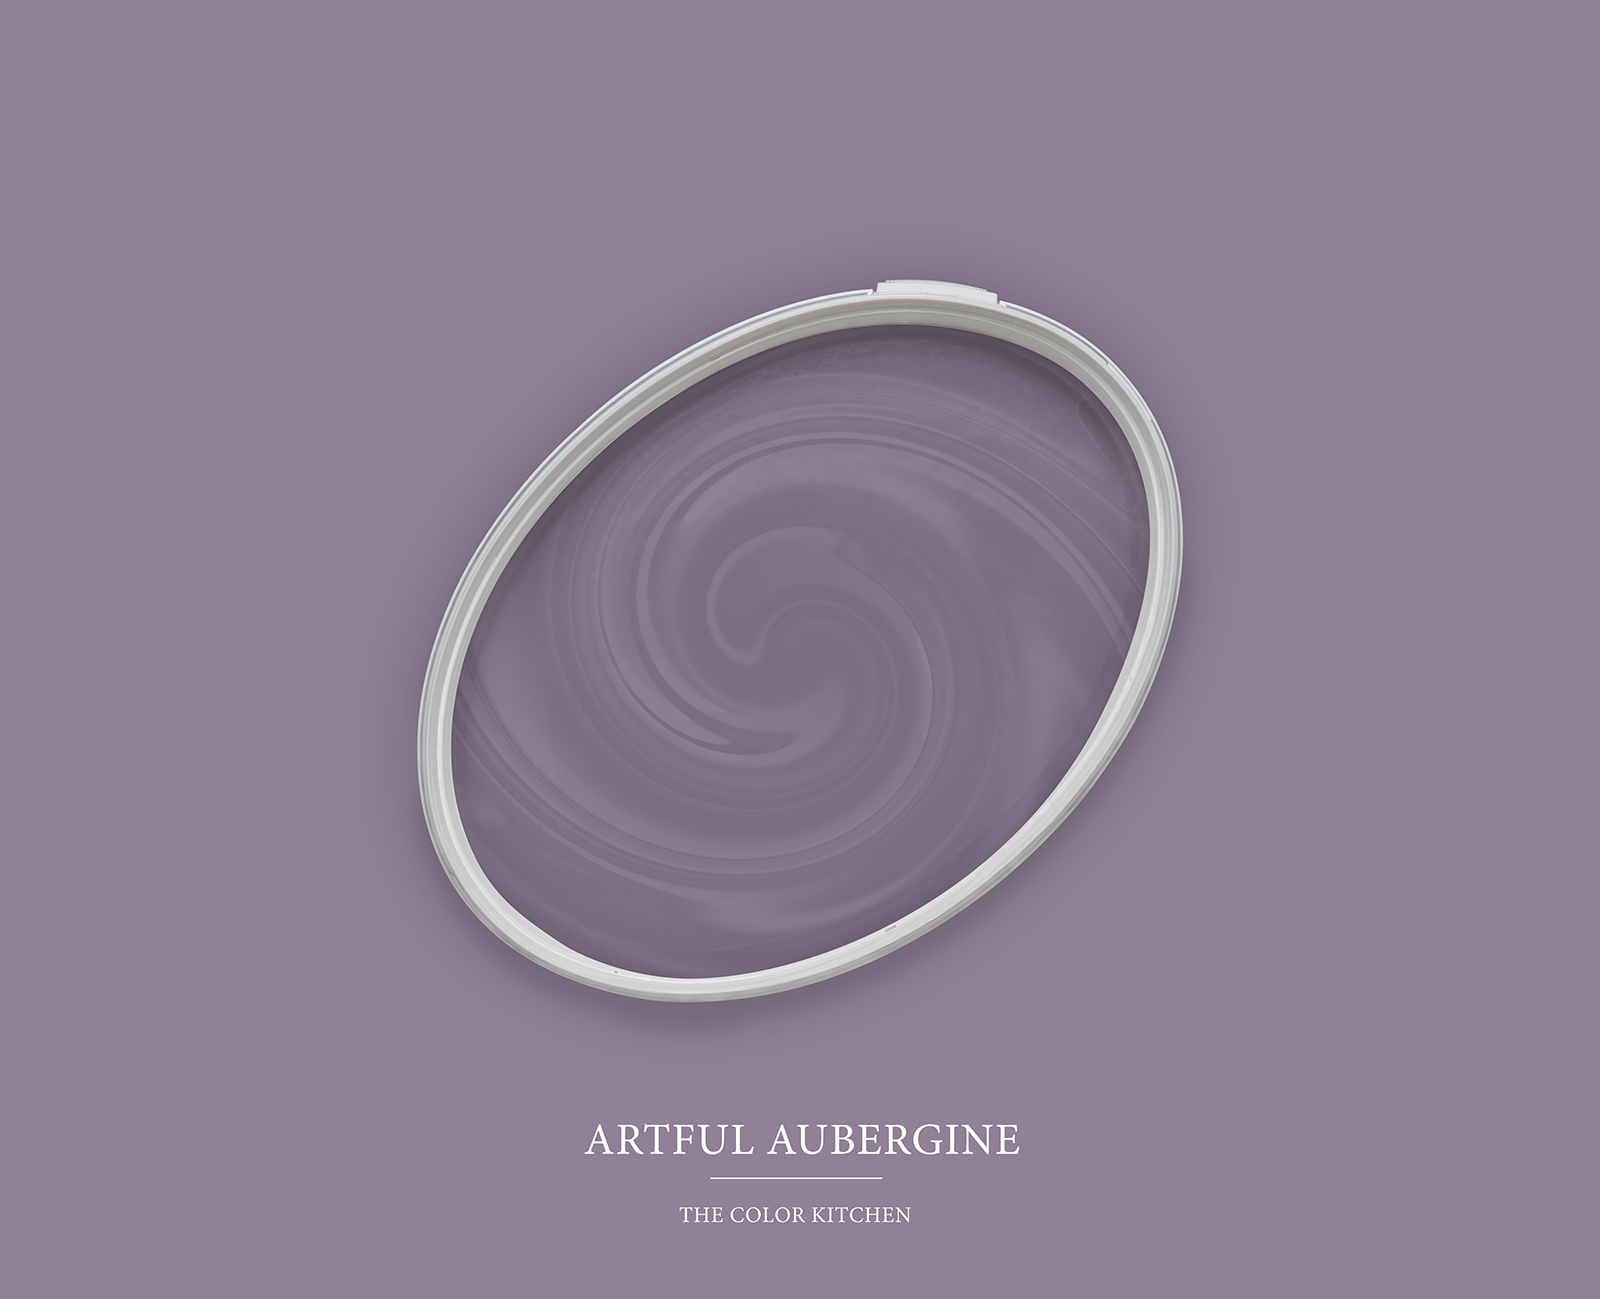         Wall Paint TCK2006 »Artful Aubergine« in strong violet – 2.5 litre
    